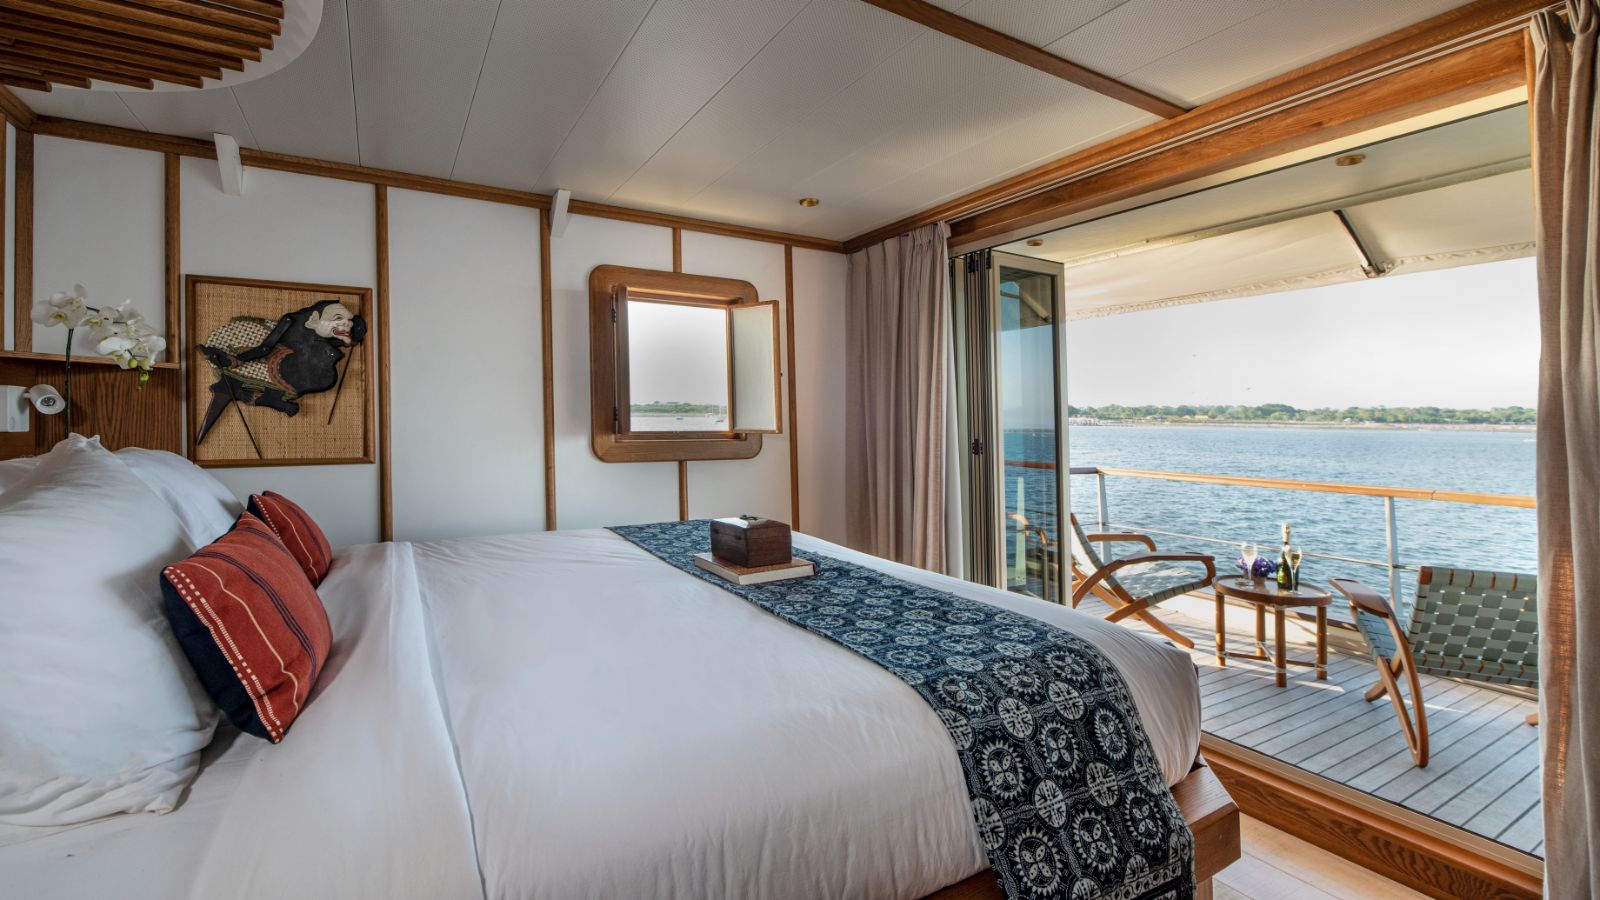 Double cabin and balcony view onboard the Kudanil Explorer phinisi in Indonesia